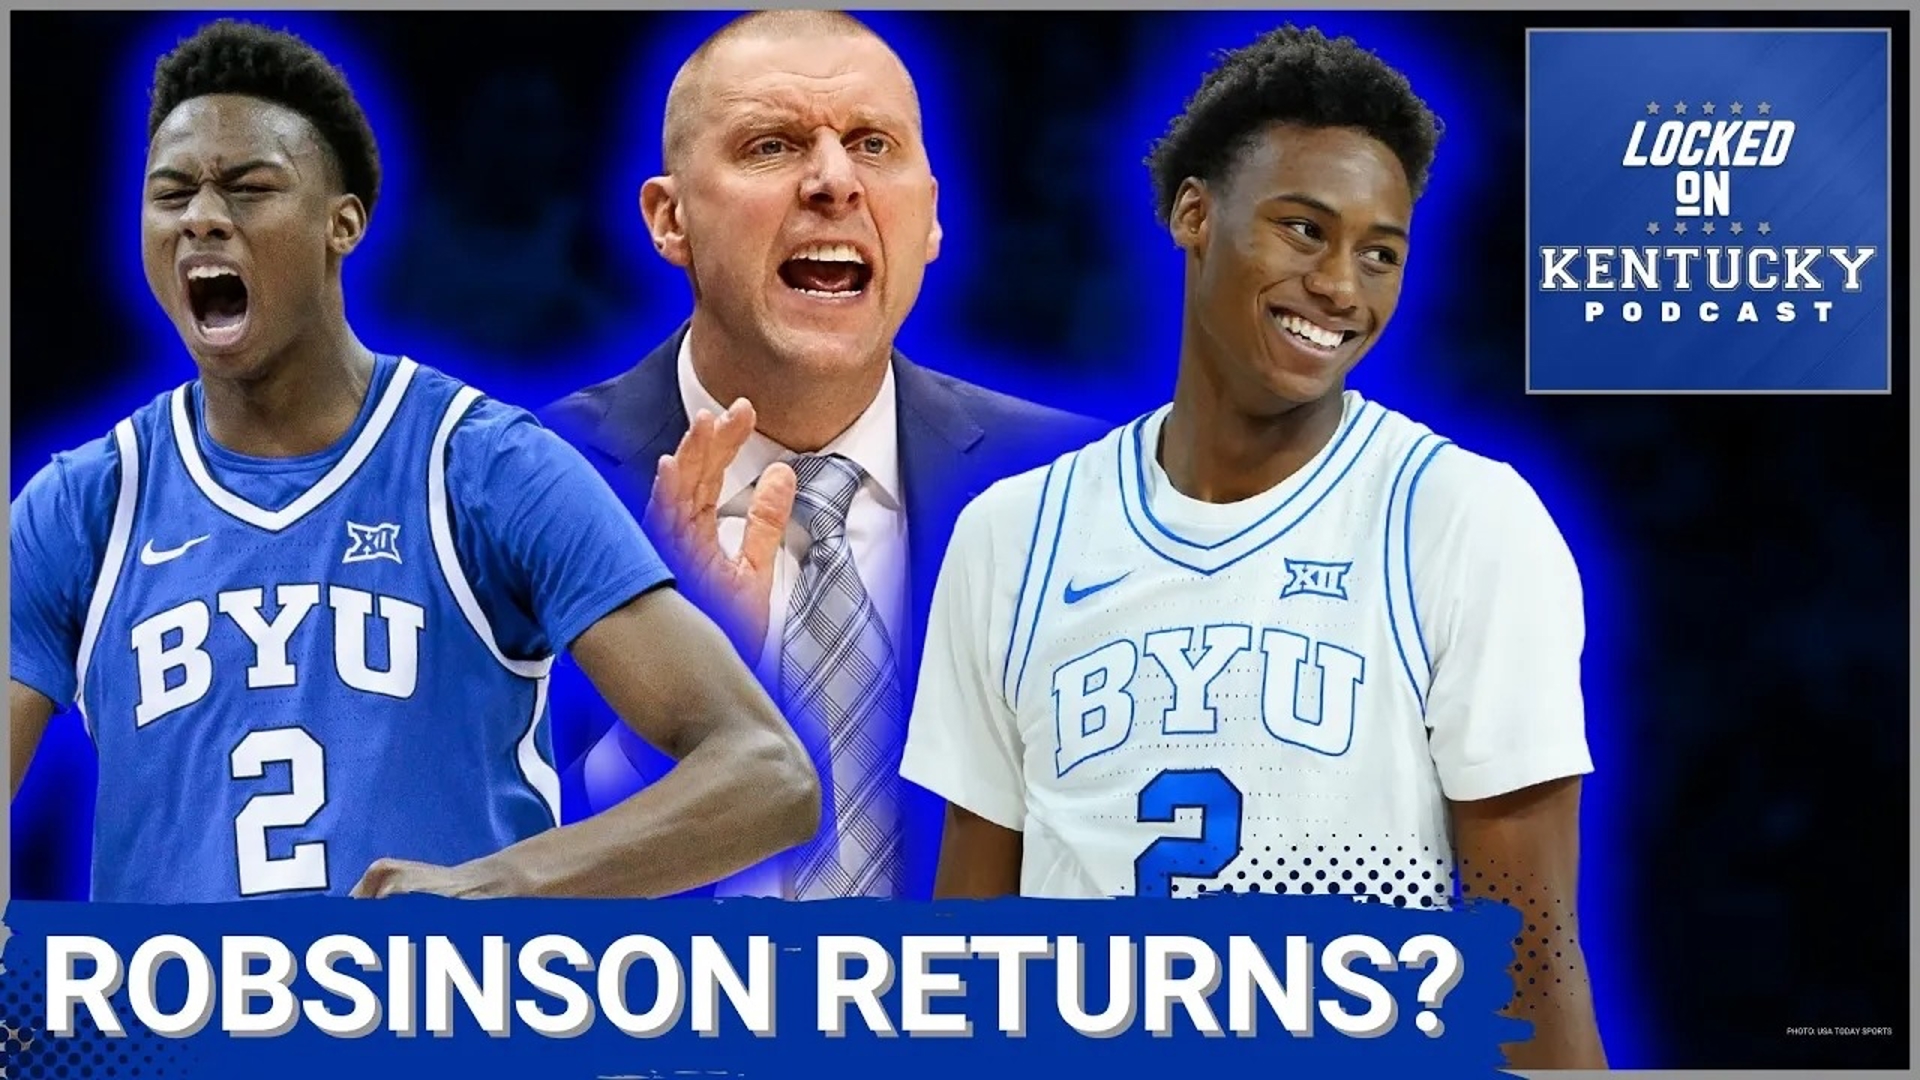 Will Jaxson Robinson withdraw from the NBA Draft? And if so, will he commit to Mark Pope and Kentucky basketball?